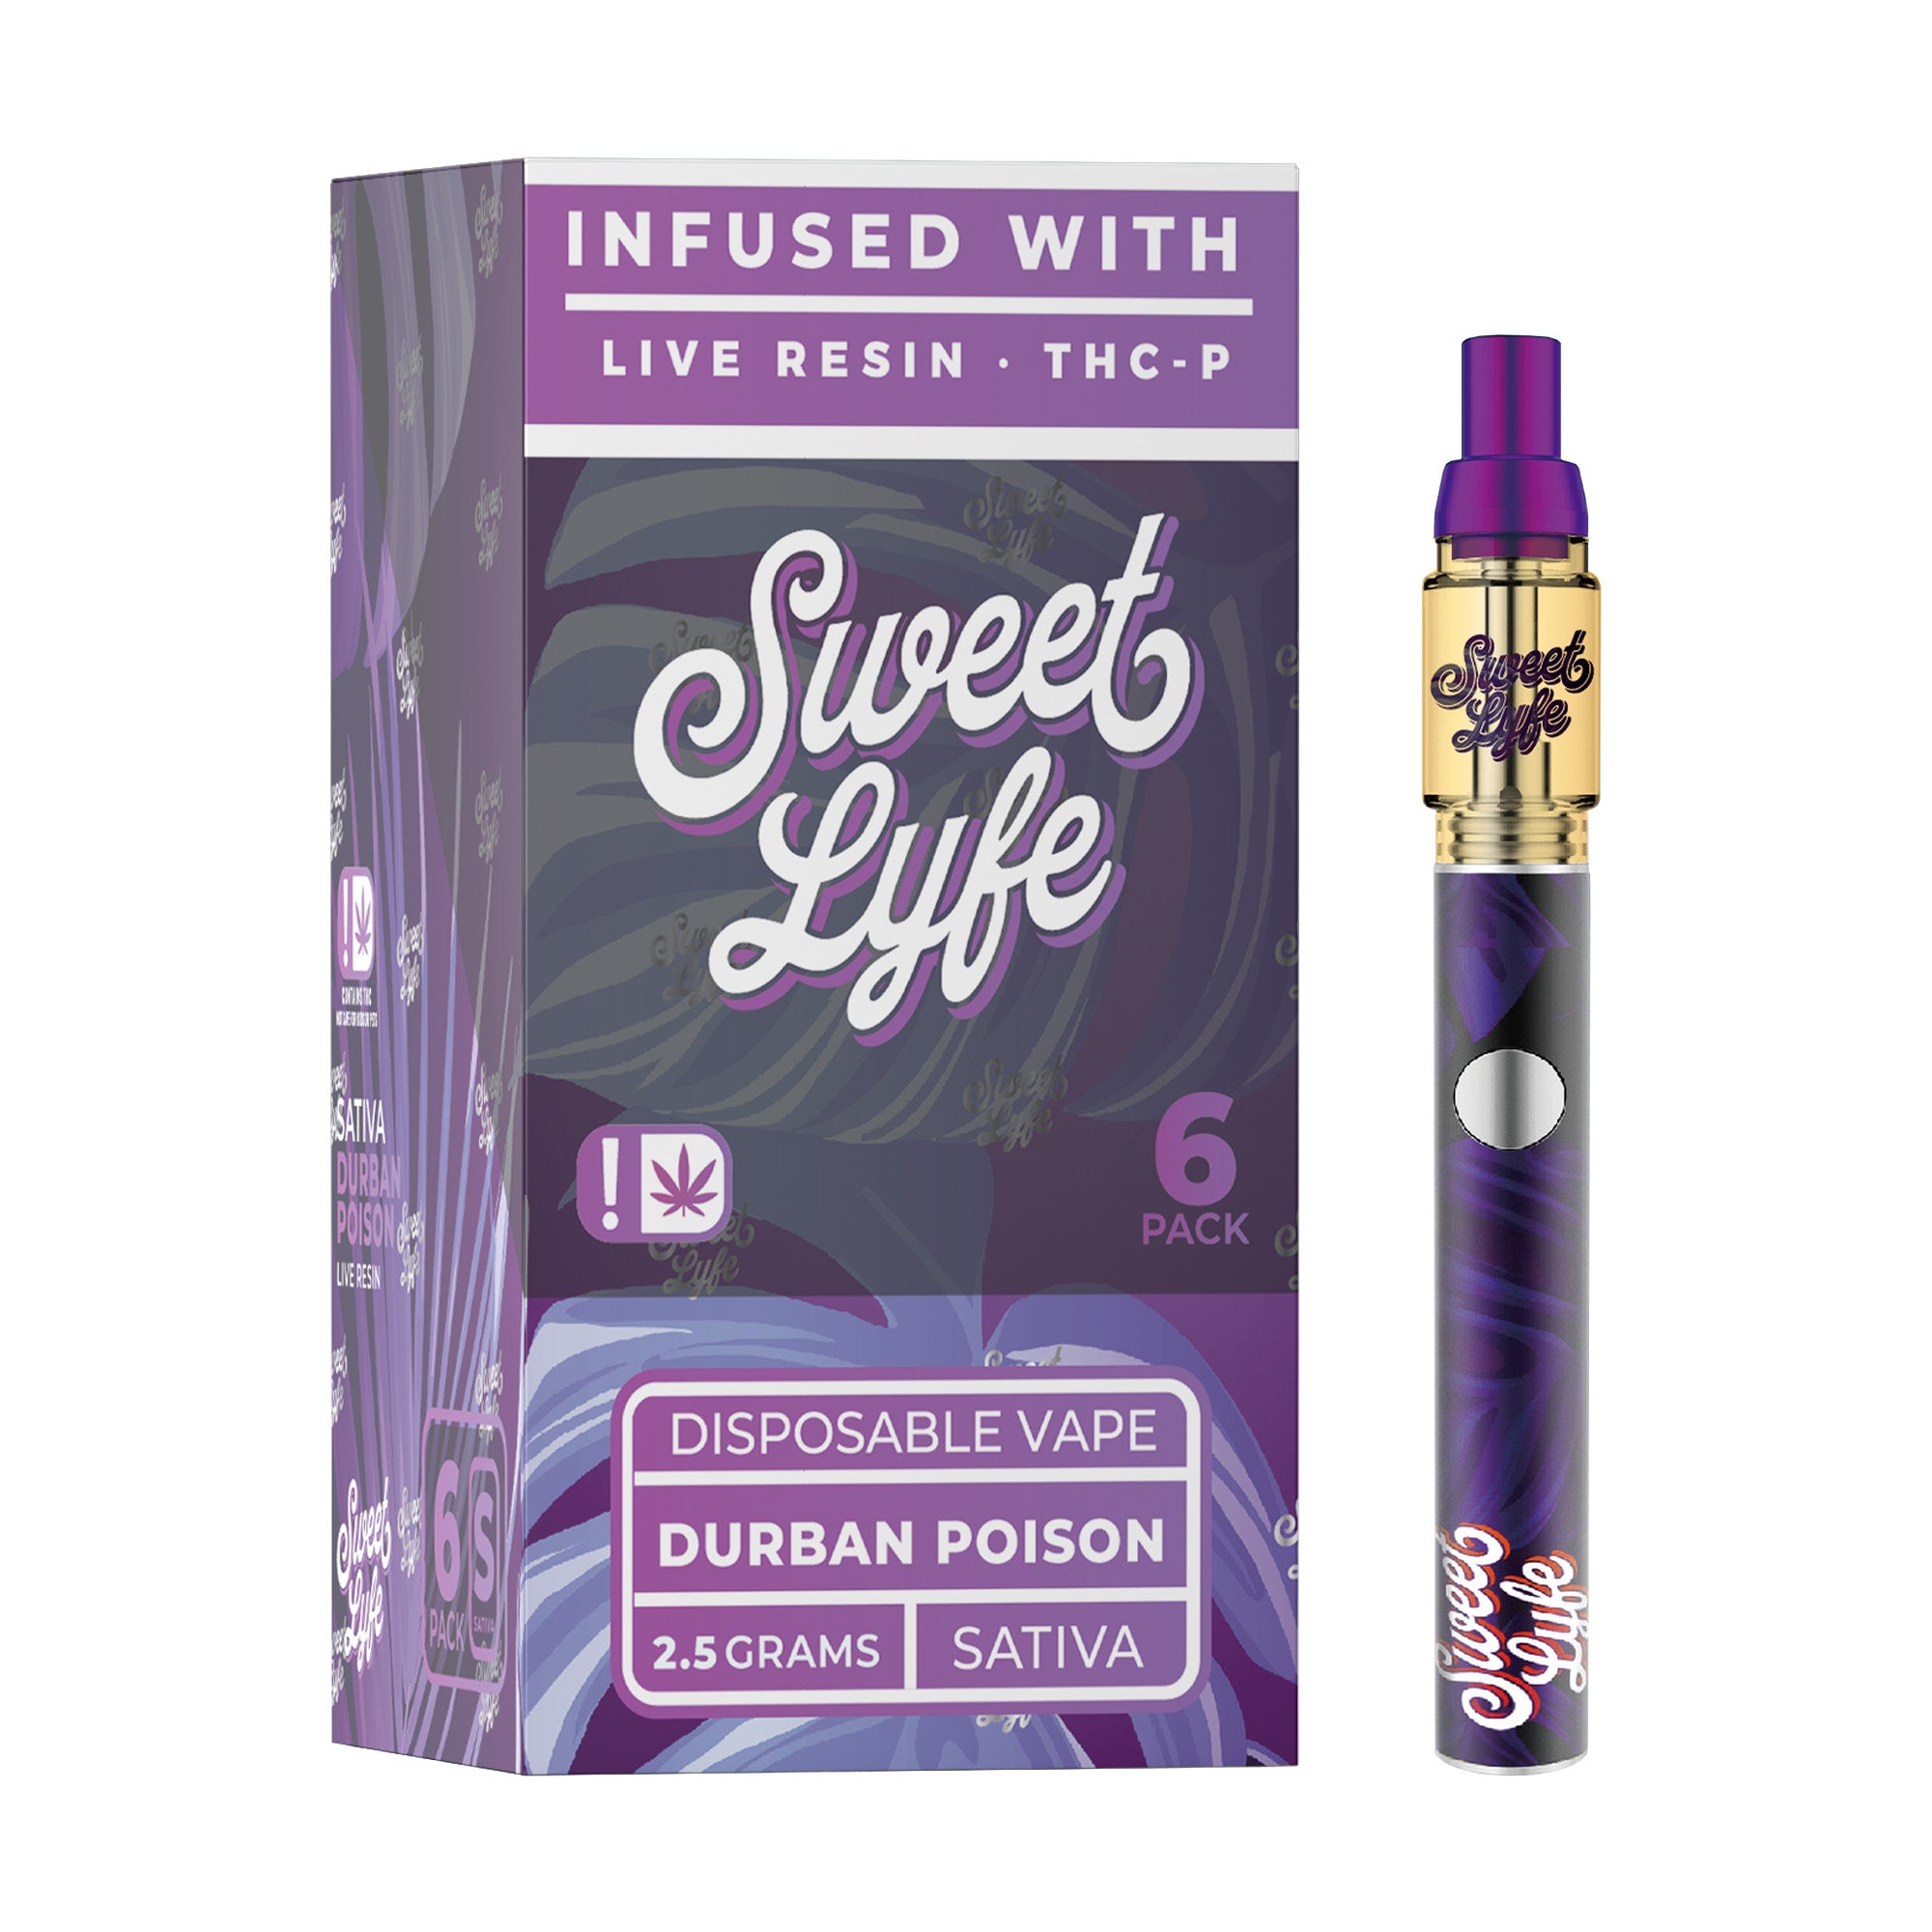 Disposable Vape Pen 2.5ml Infused with Live Resin Delta-8 + THC-P - Durban Poison - Sativa